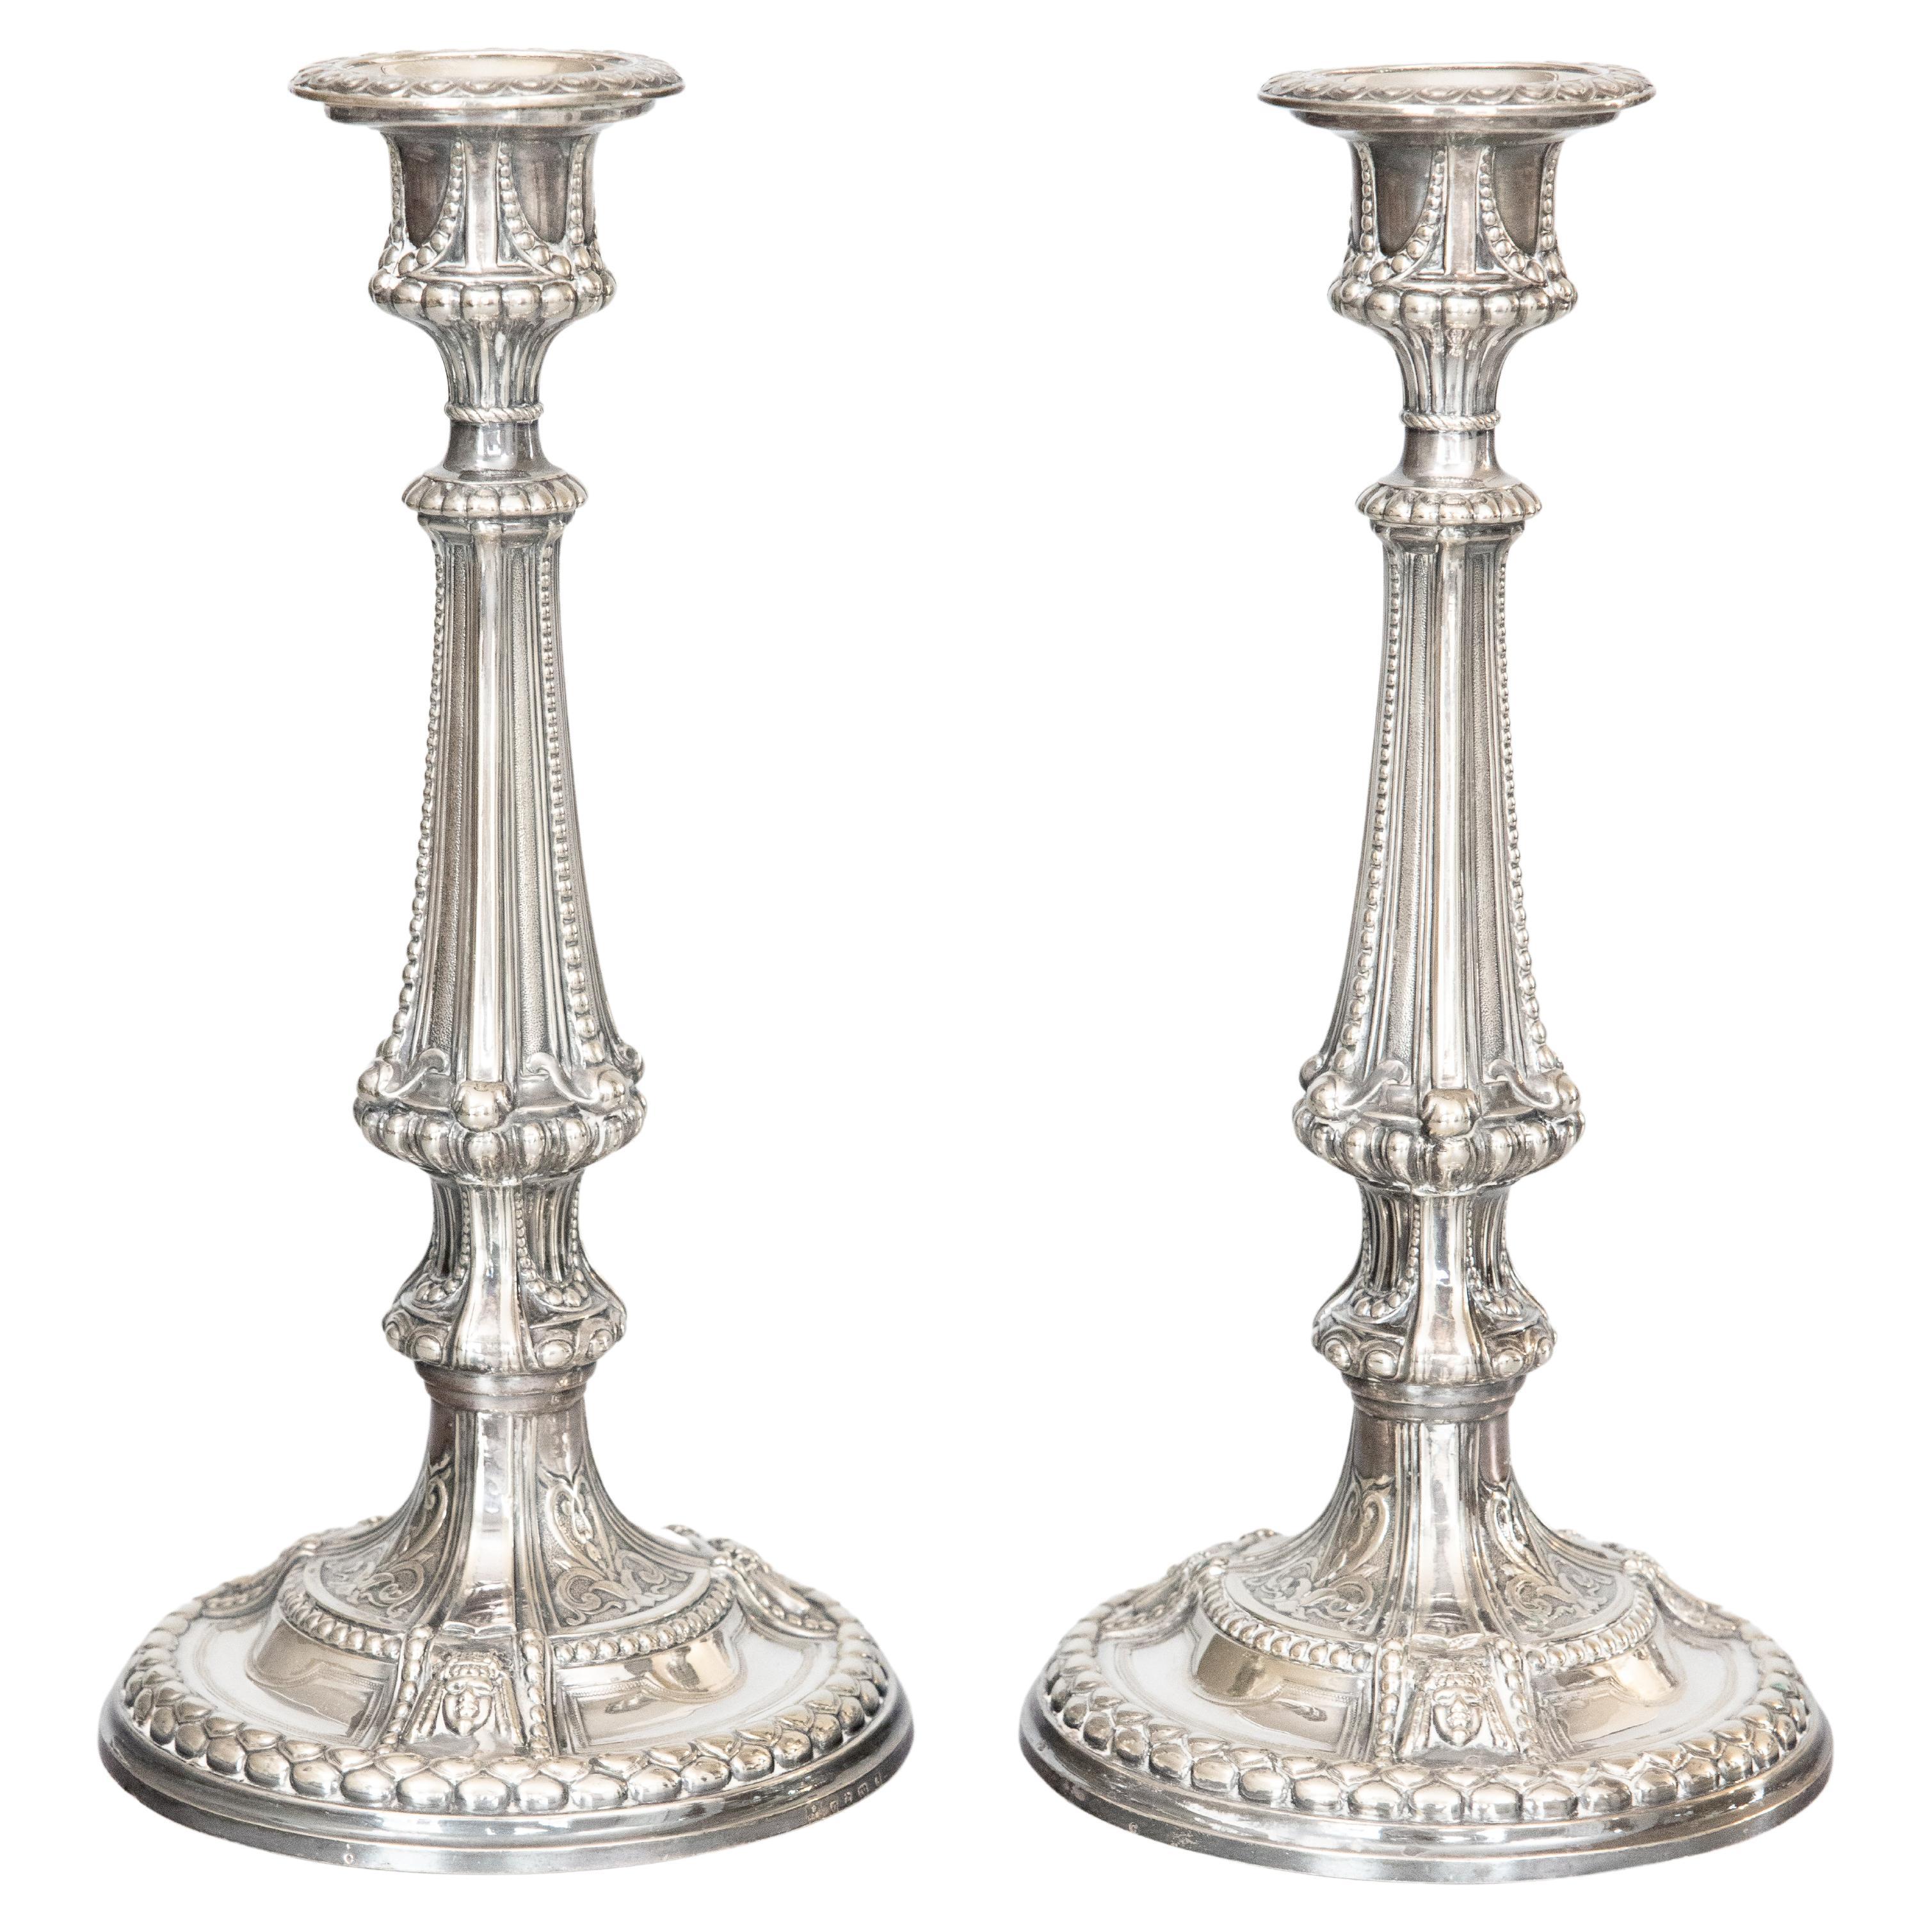 Pair of Antique Neoclassical Style English Silver Plate Candlesticks c. 1900 For Sale